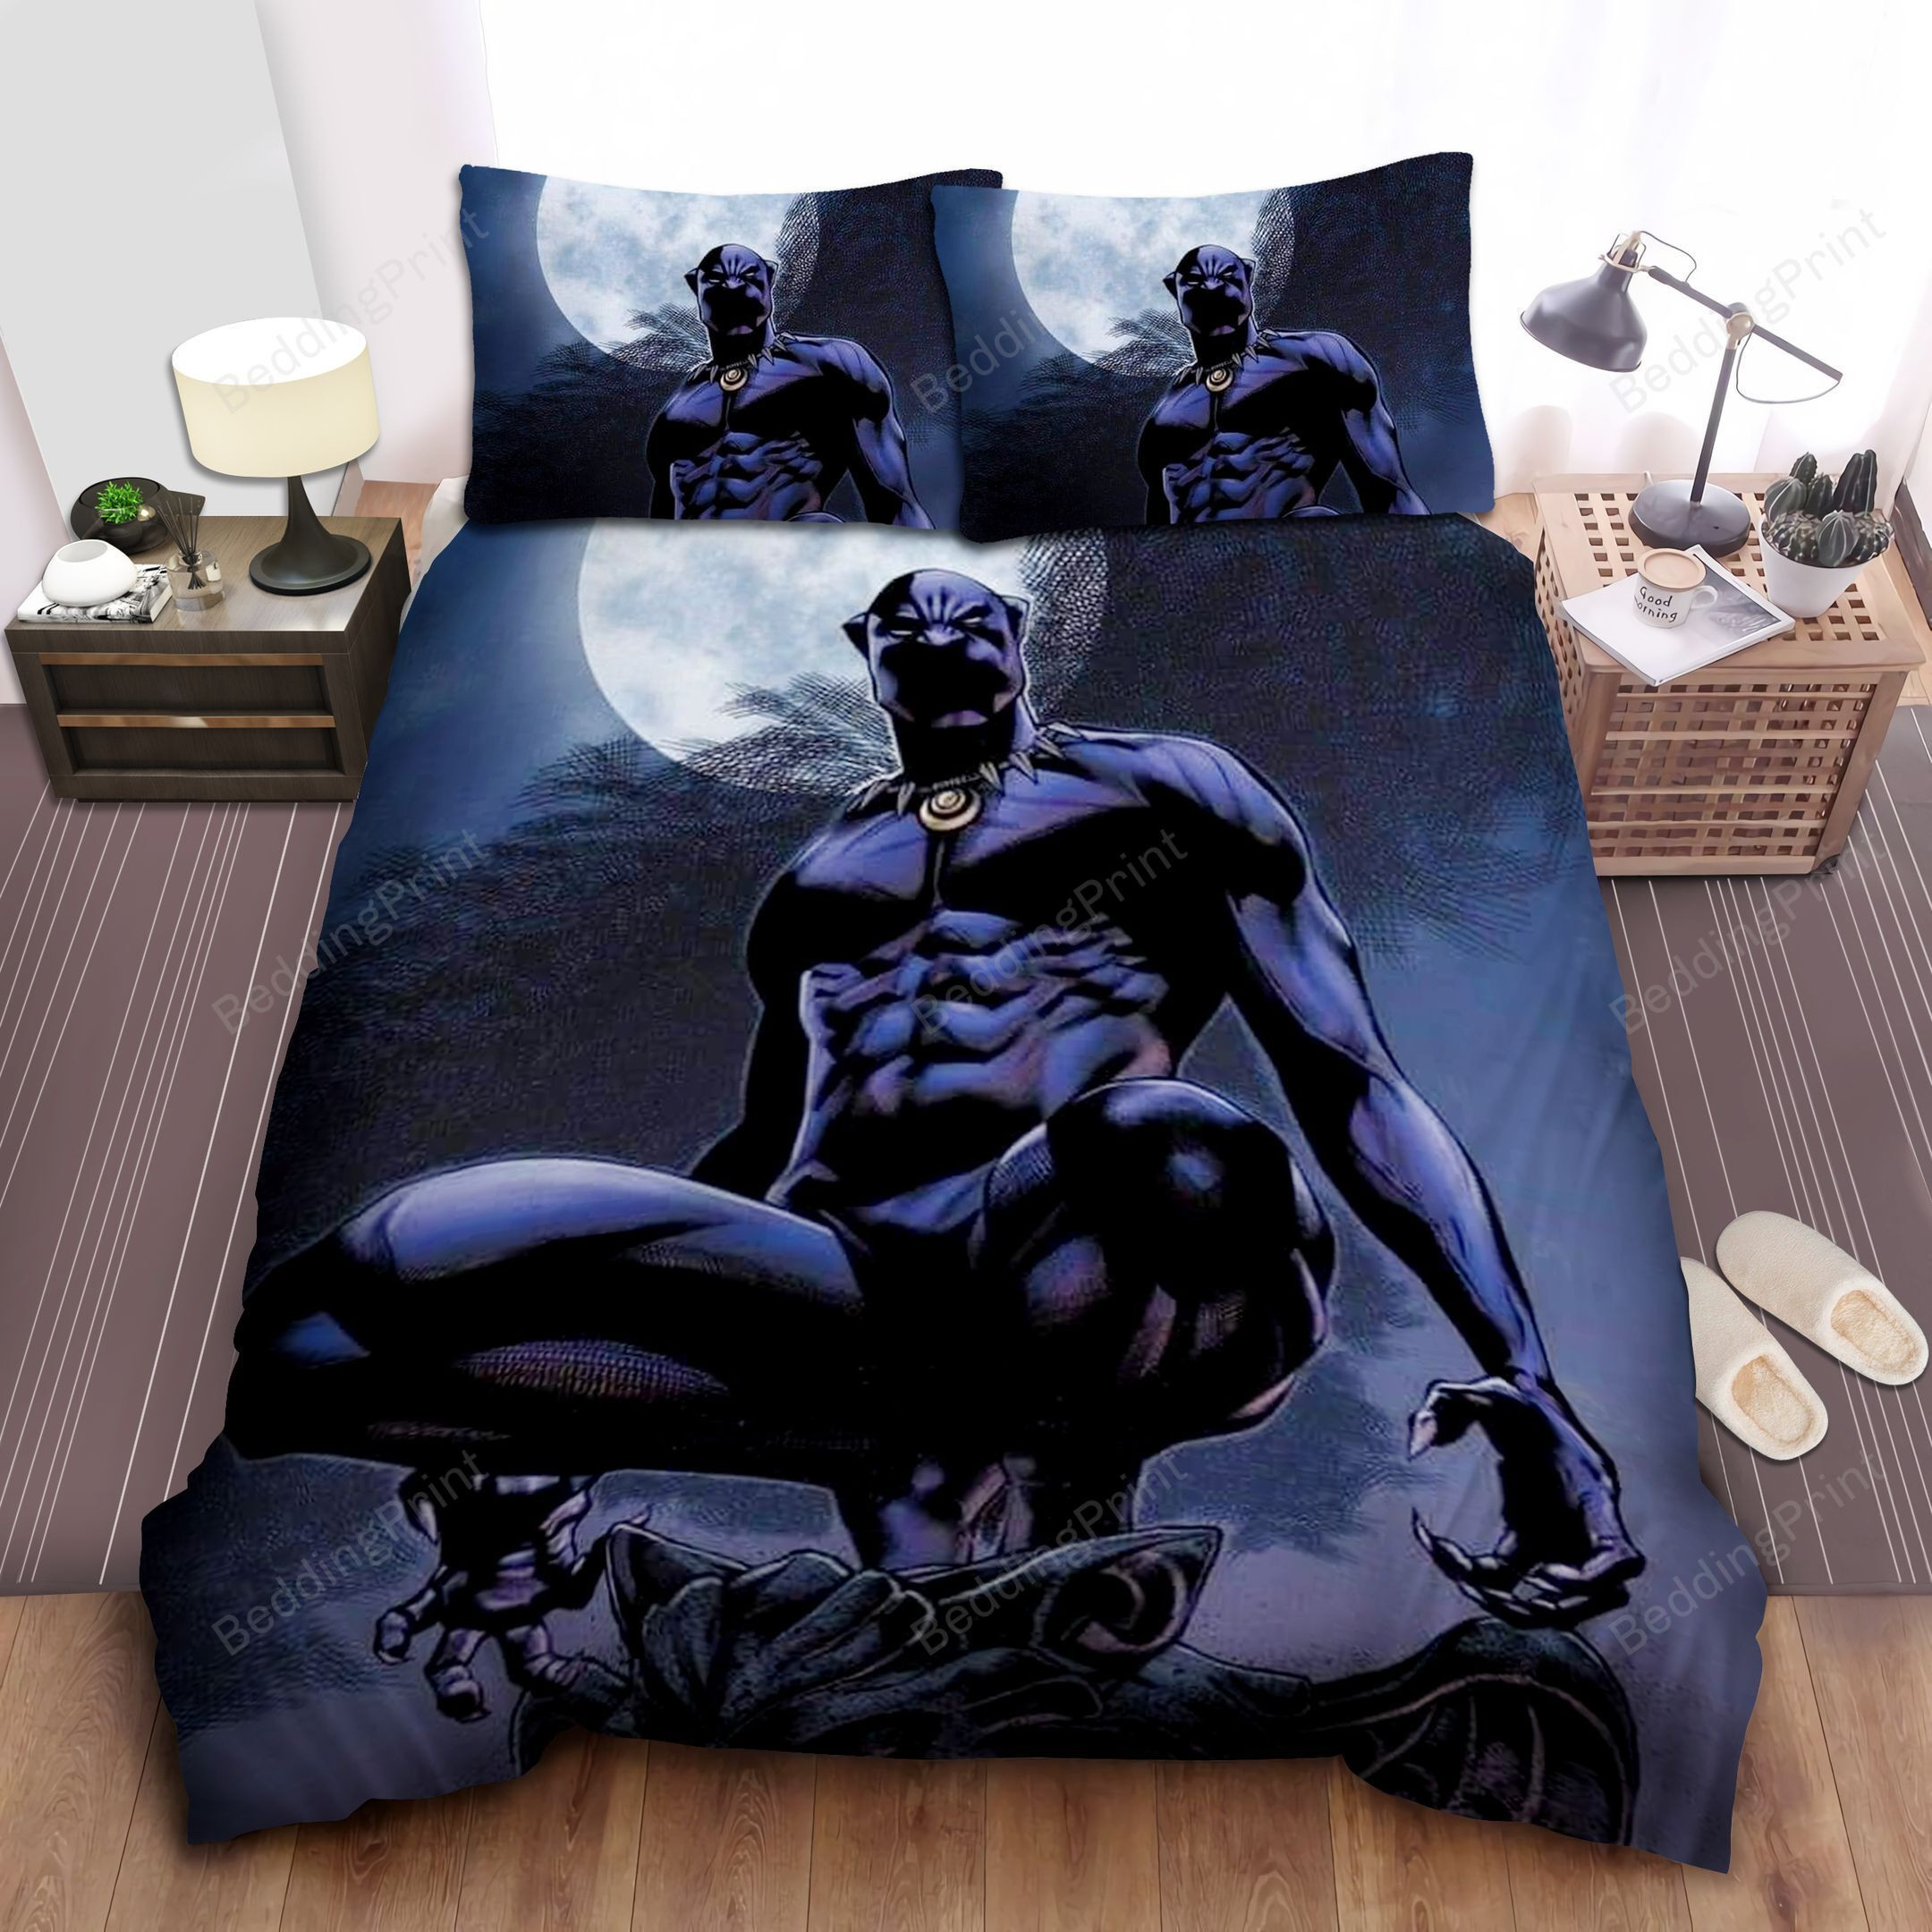 Black Panther Under The Moon Bed Sheets Duvet Cover Bedding Sets - HomeFavo